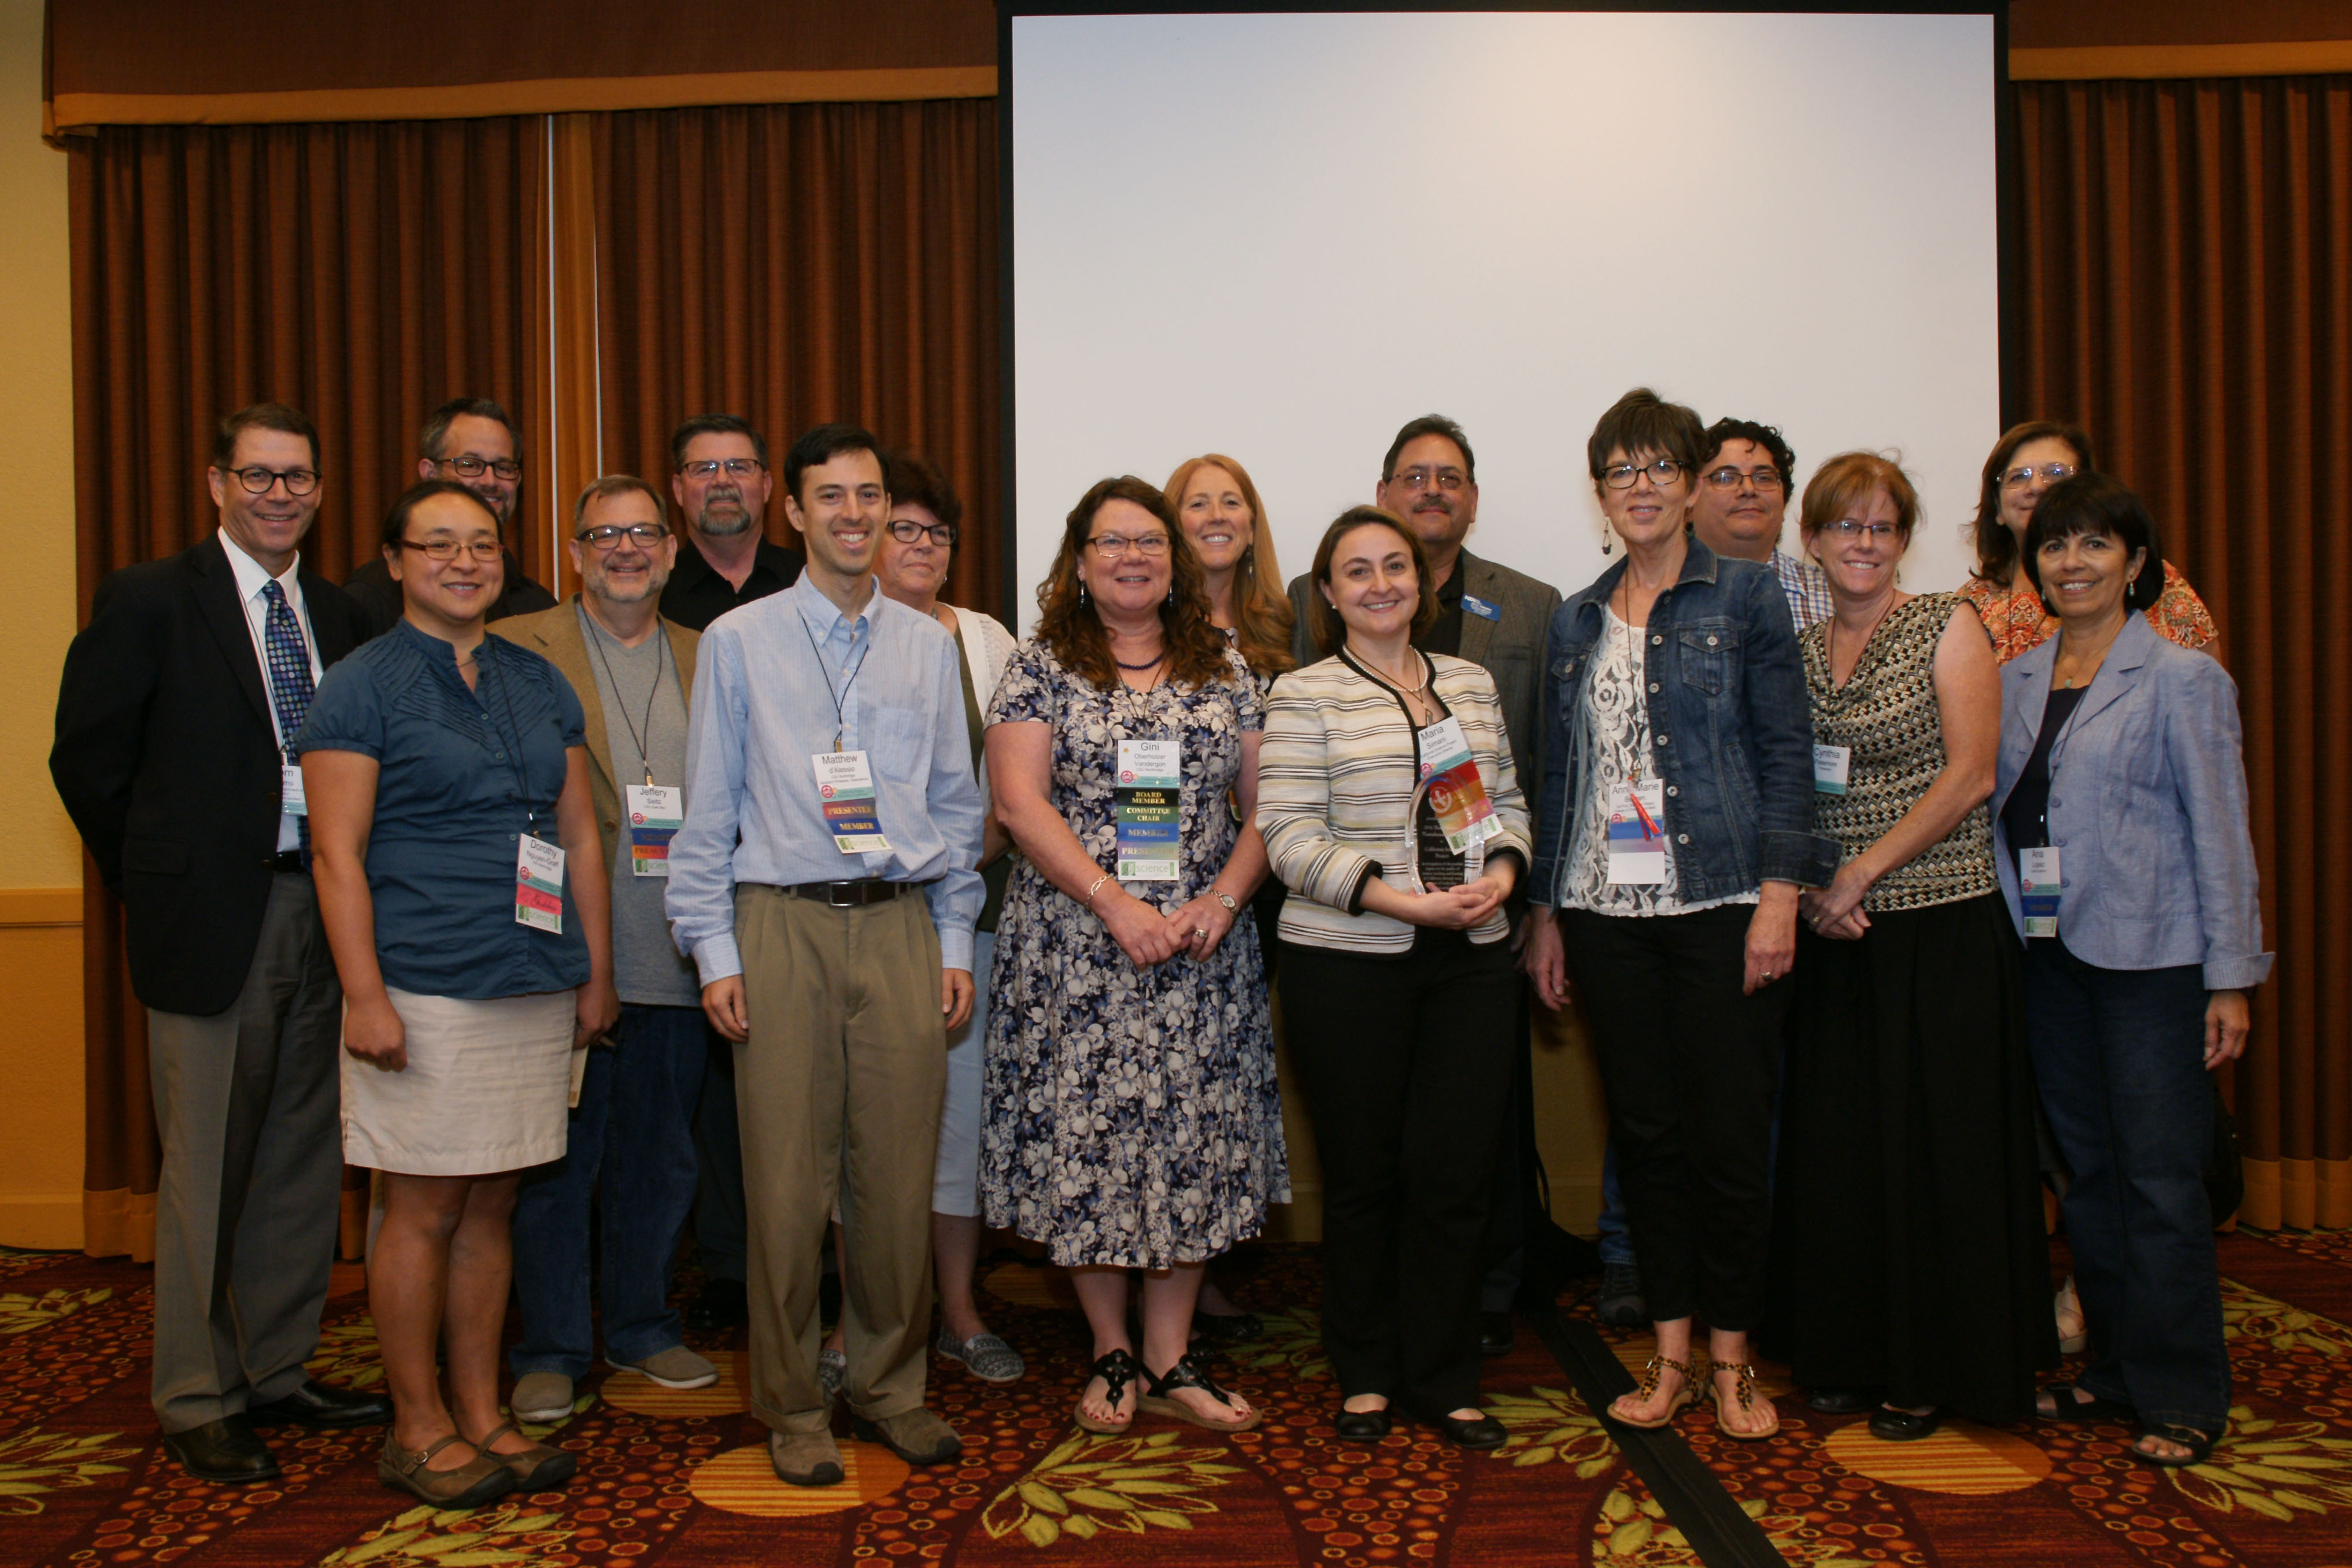 Sixteen California Science educators in semi-formal attire wearing conference lanyards are posing and  standing together and smiling in a conference room.